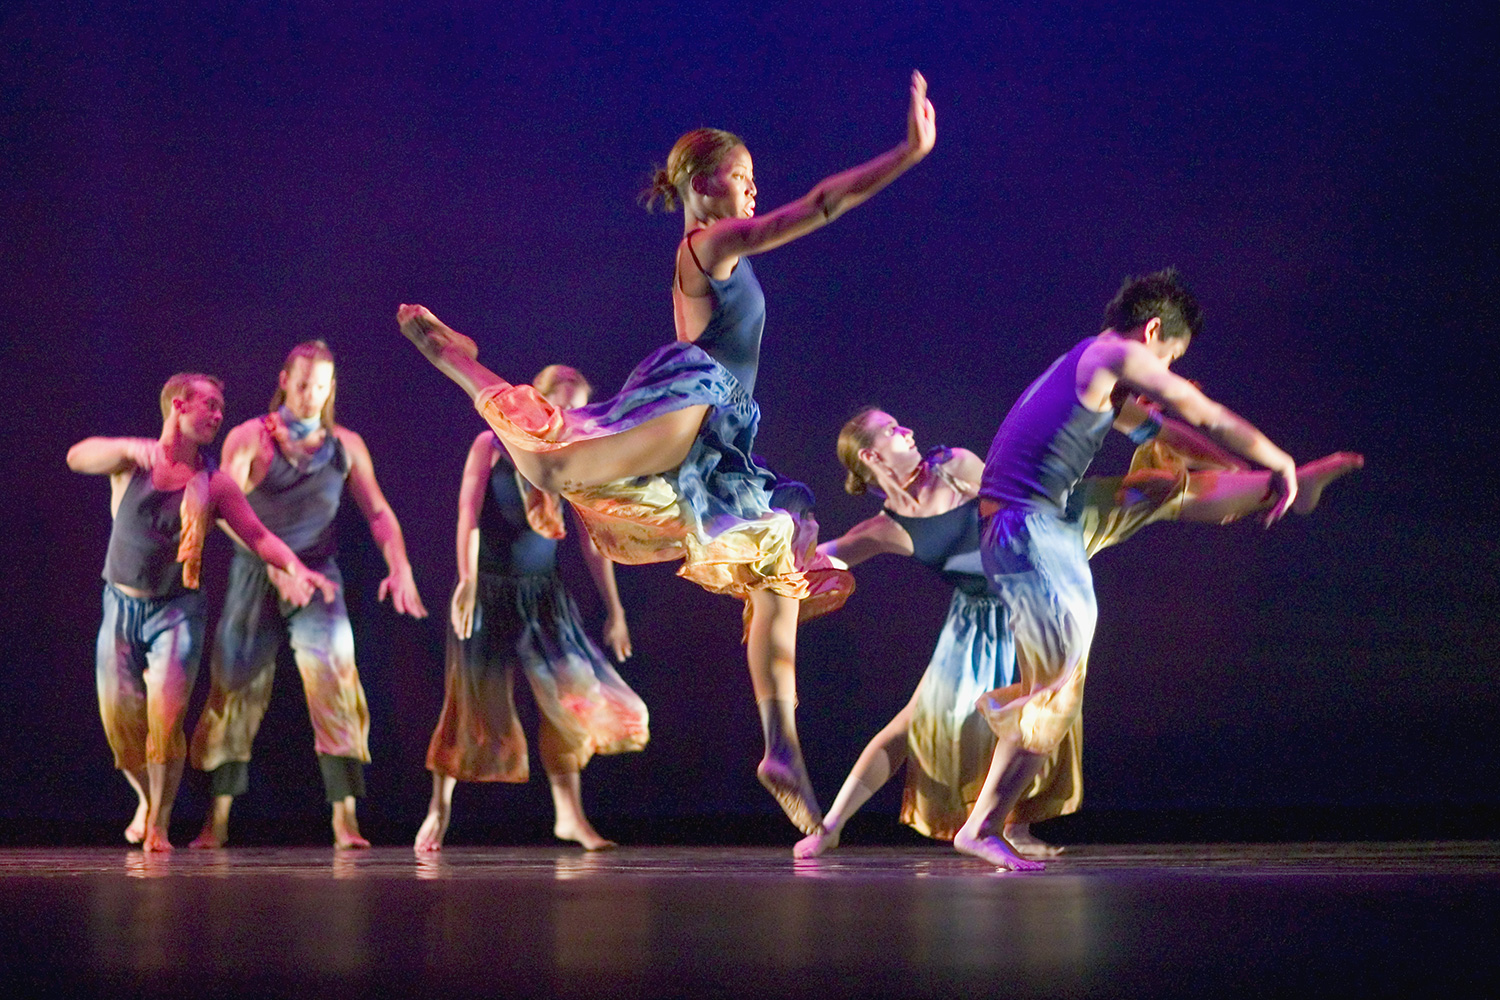 photo: students performing dance on stage